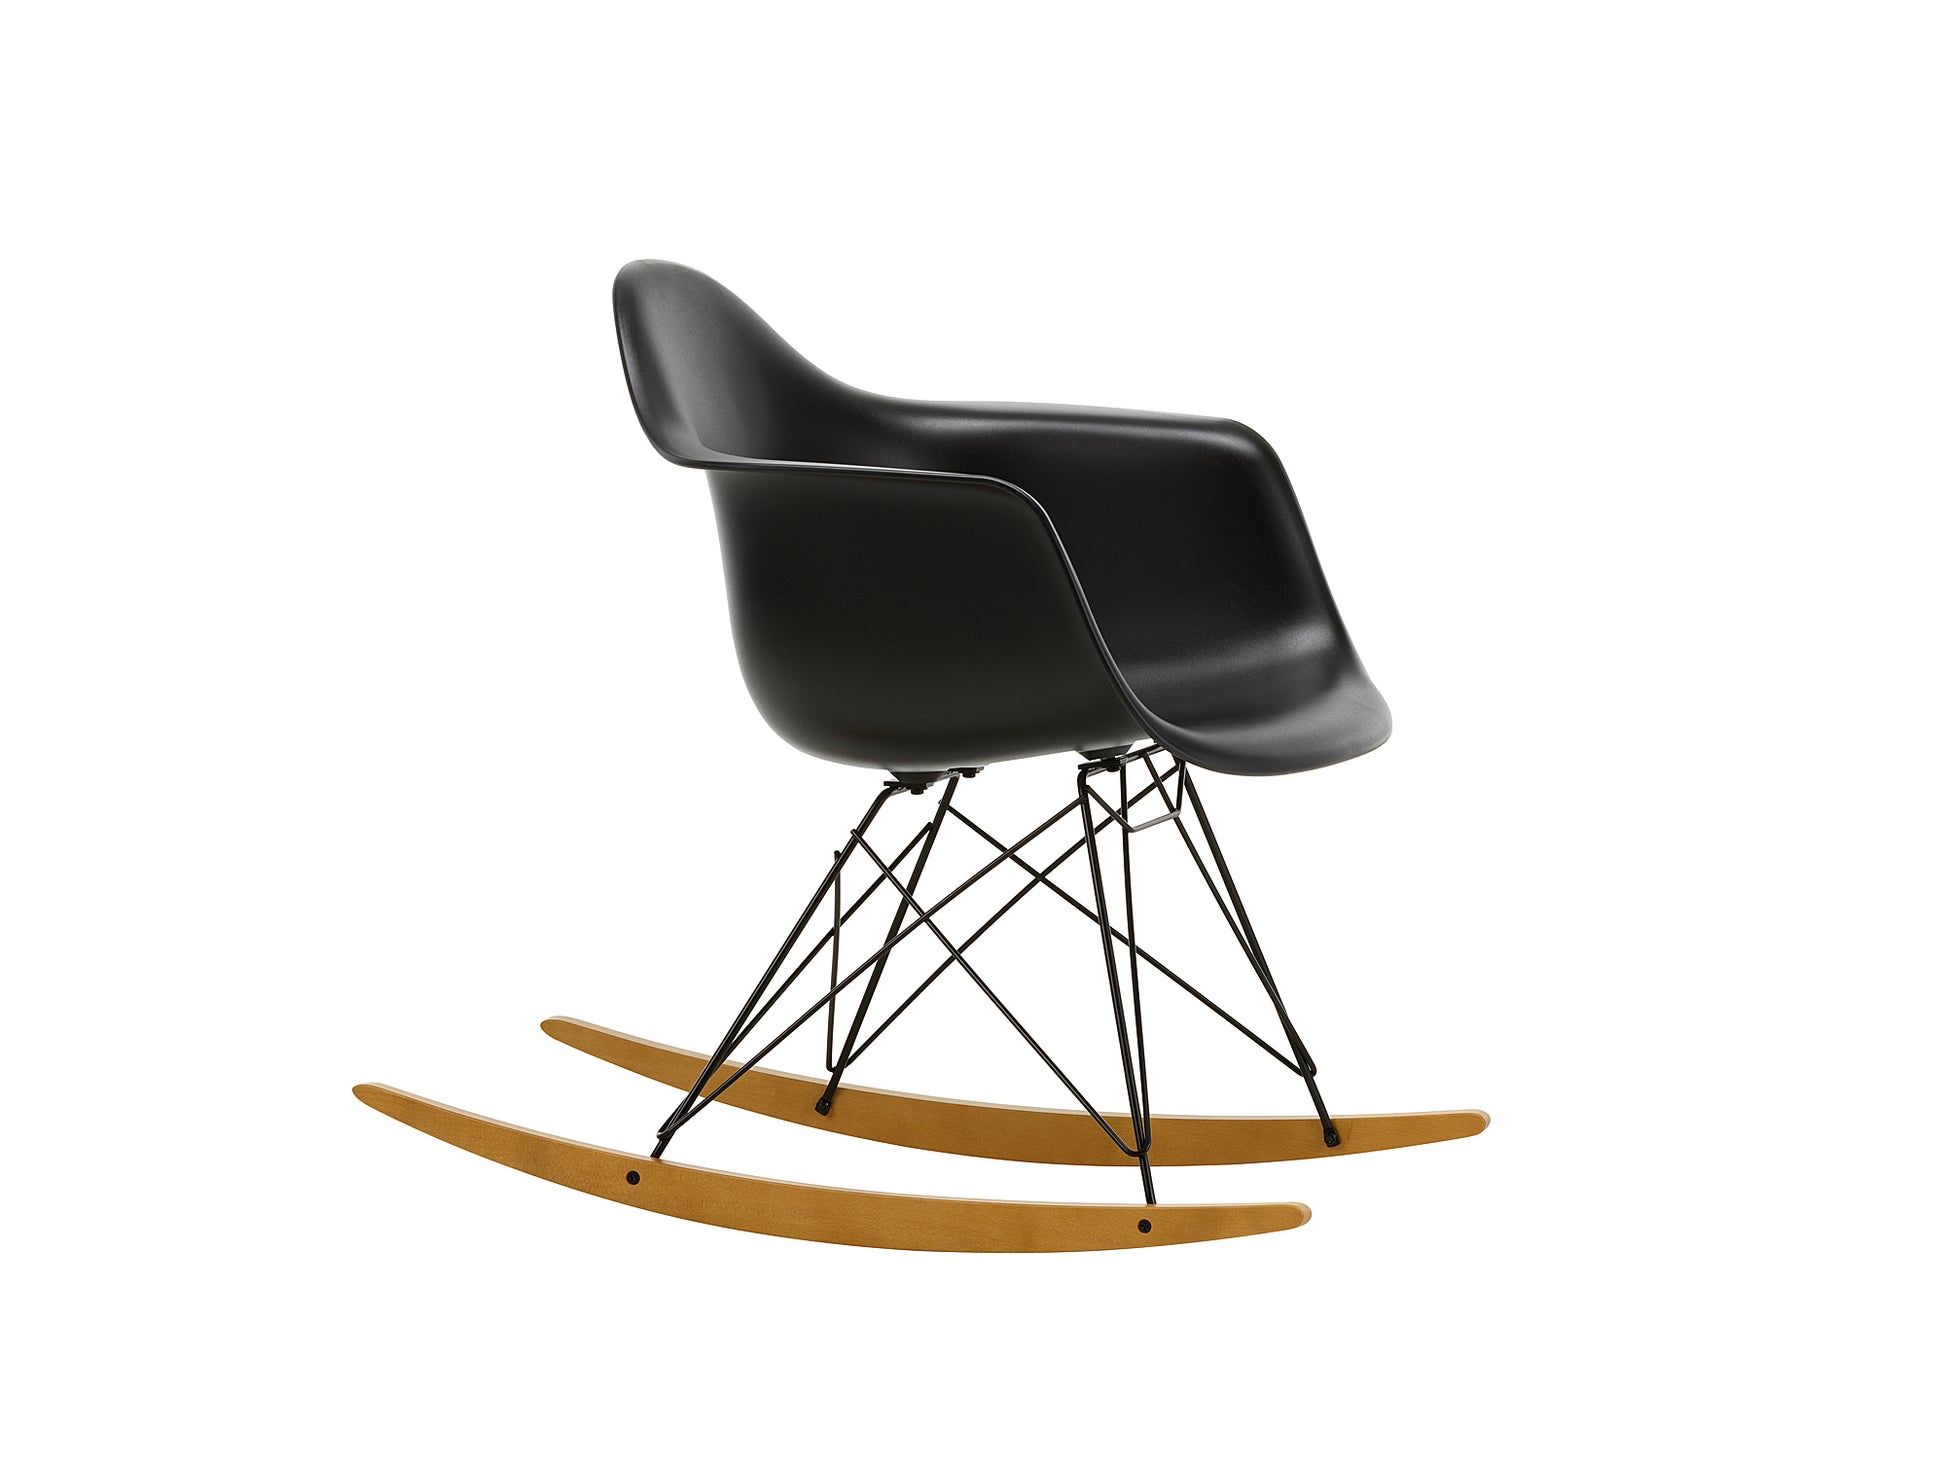 Eames RAR Plastic Armchair in Deep Black with Basic Dark Base and Golden Maple Rockers by Vitra